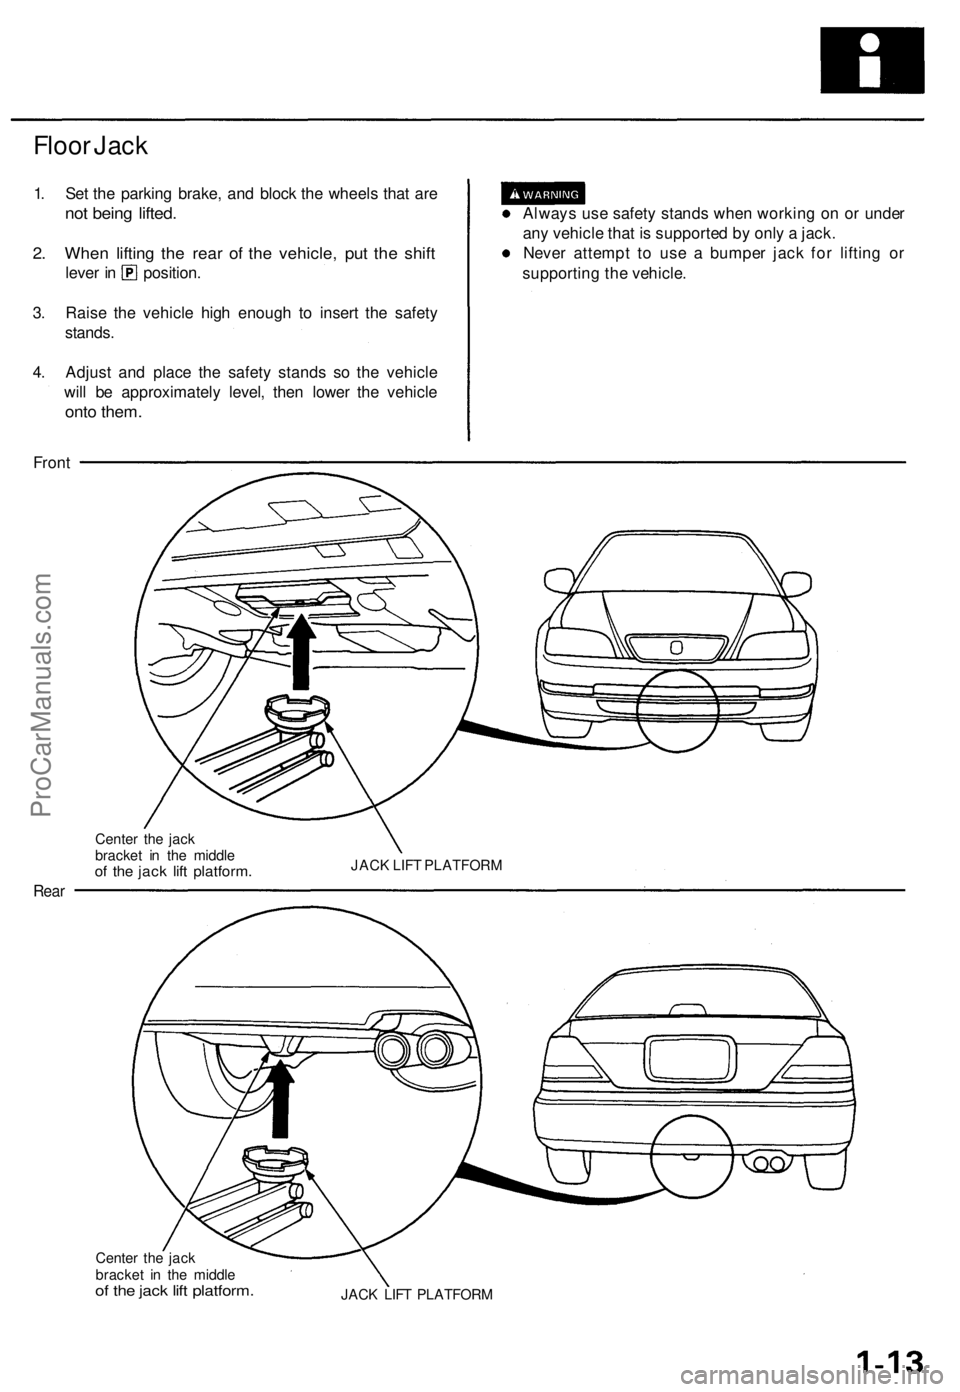 ACURA TL 1995  Service Repair Manual 
Floor Jack

1. Set the parking brake, and block the wheels that are

not being lifted.

2. When lifting the rear of the vehicle, put the shift

lever in position.

3. Raise the vehicle high enough to